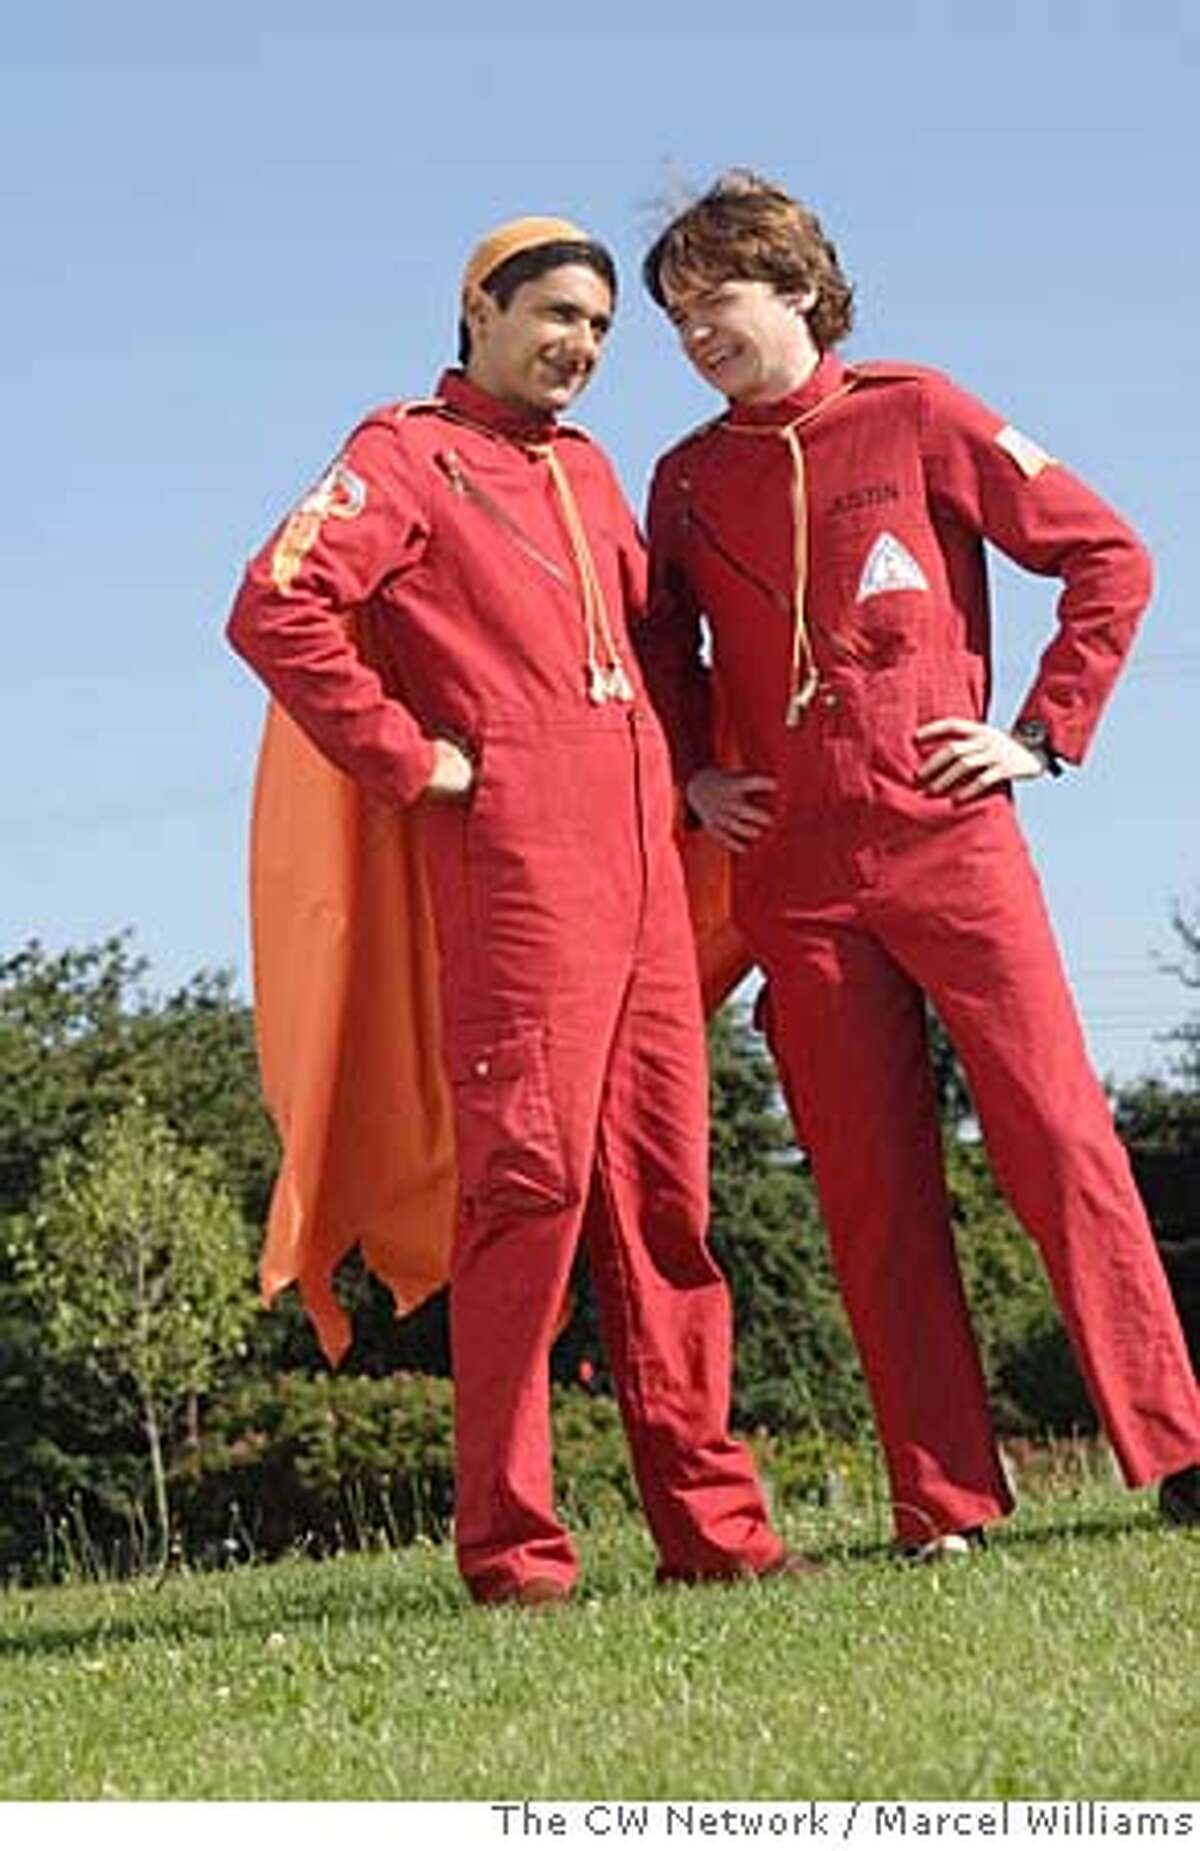 "Rocket Club" -- (L-R) Pictured Dan Byrd as Justin Tolchuck and Adhir Kalyan as Raja Musharaff stars in ALIENS IN AMERICA on The CW. Photo: Marcel Williams/ The CW �2007 The CW Network, LLC. All Rights Reserved. MANDATORY CREDIT; NO SALES; NO ARCHIVE; NORTH AMERICAN USE ONLY